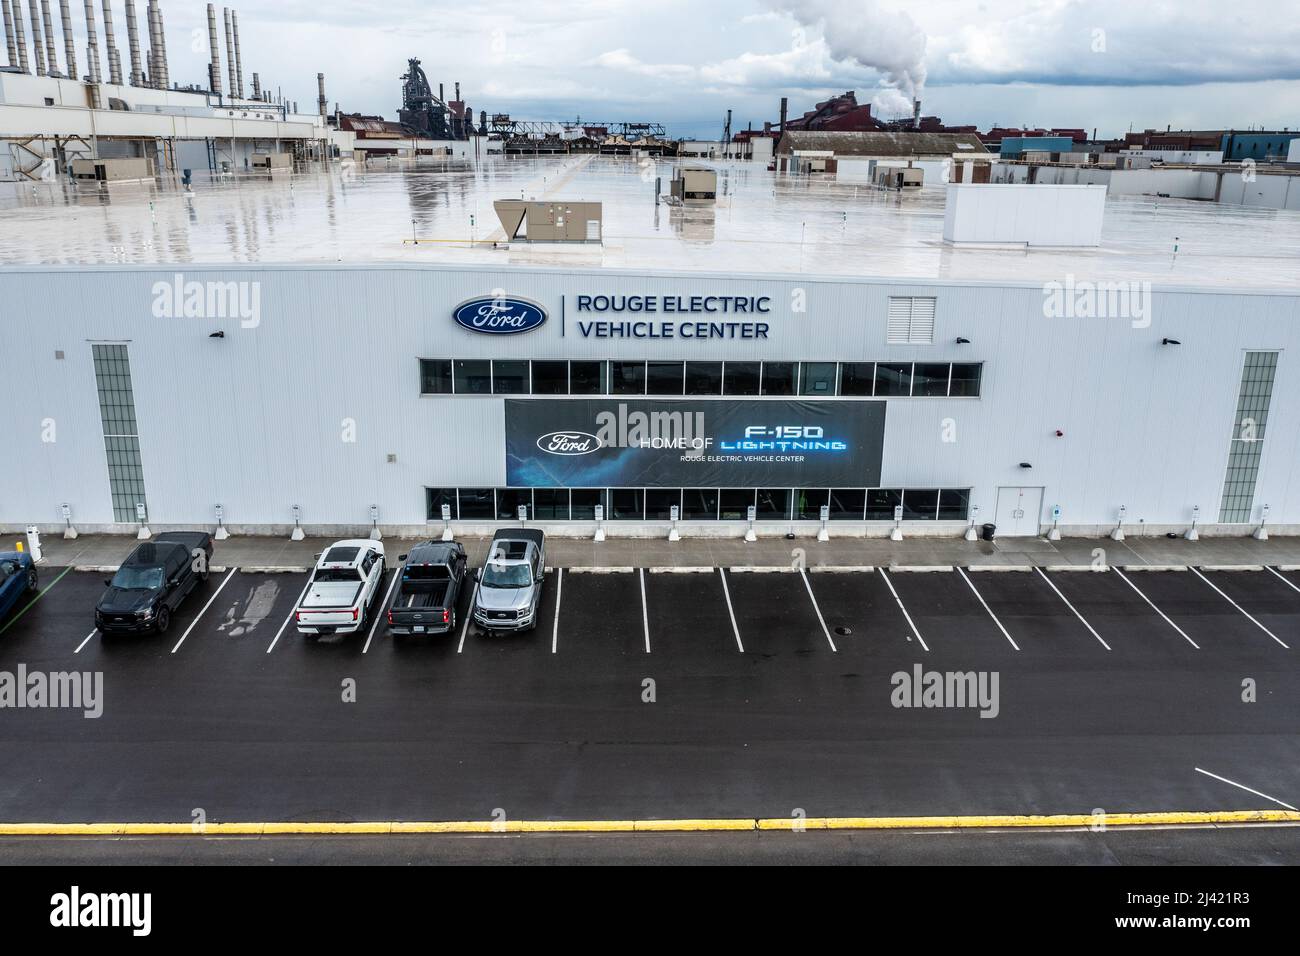 Ford River Rouge Complex, EV F-150 Lightning Factory, Ford Motor Company, Dearborn, MI, USA Stockfoto